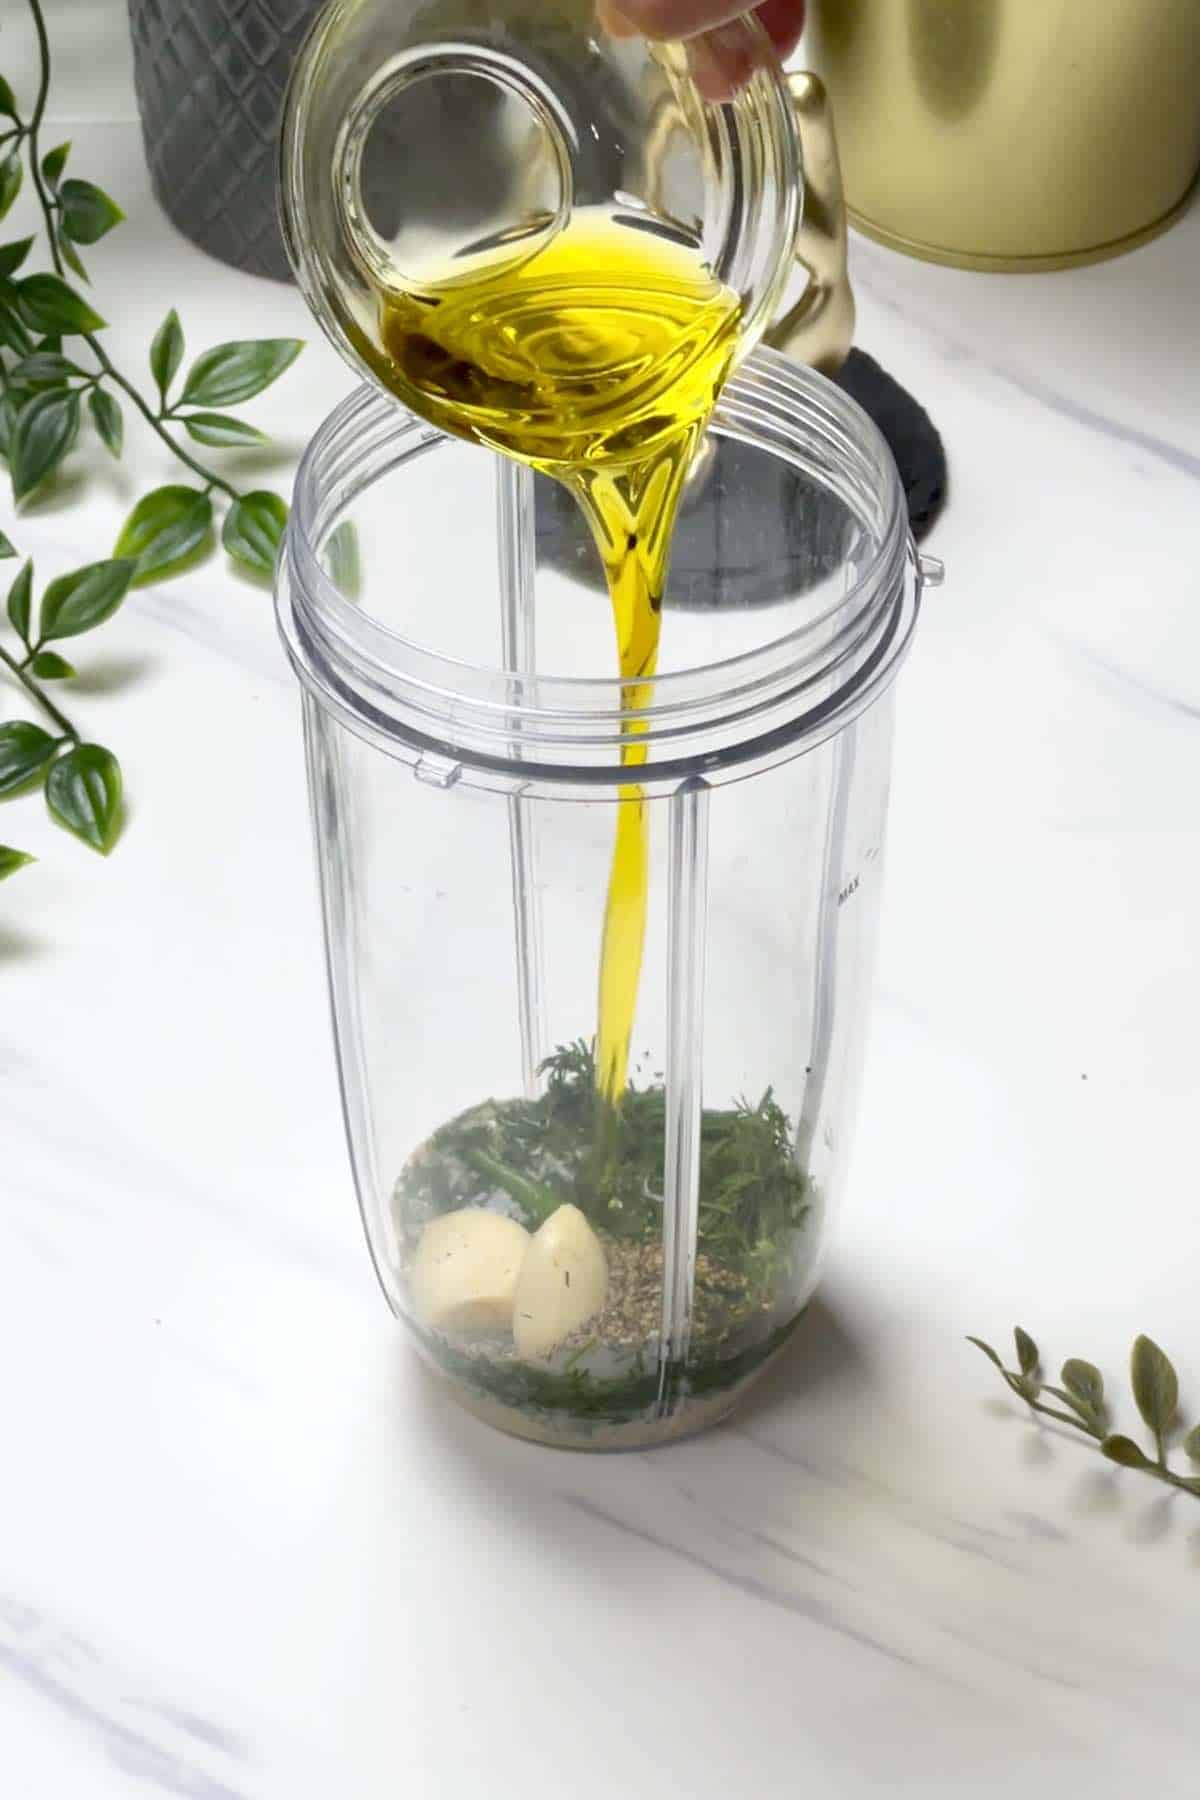 adding lemon juice, dill, oil and other ingredients to a blender jar